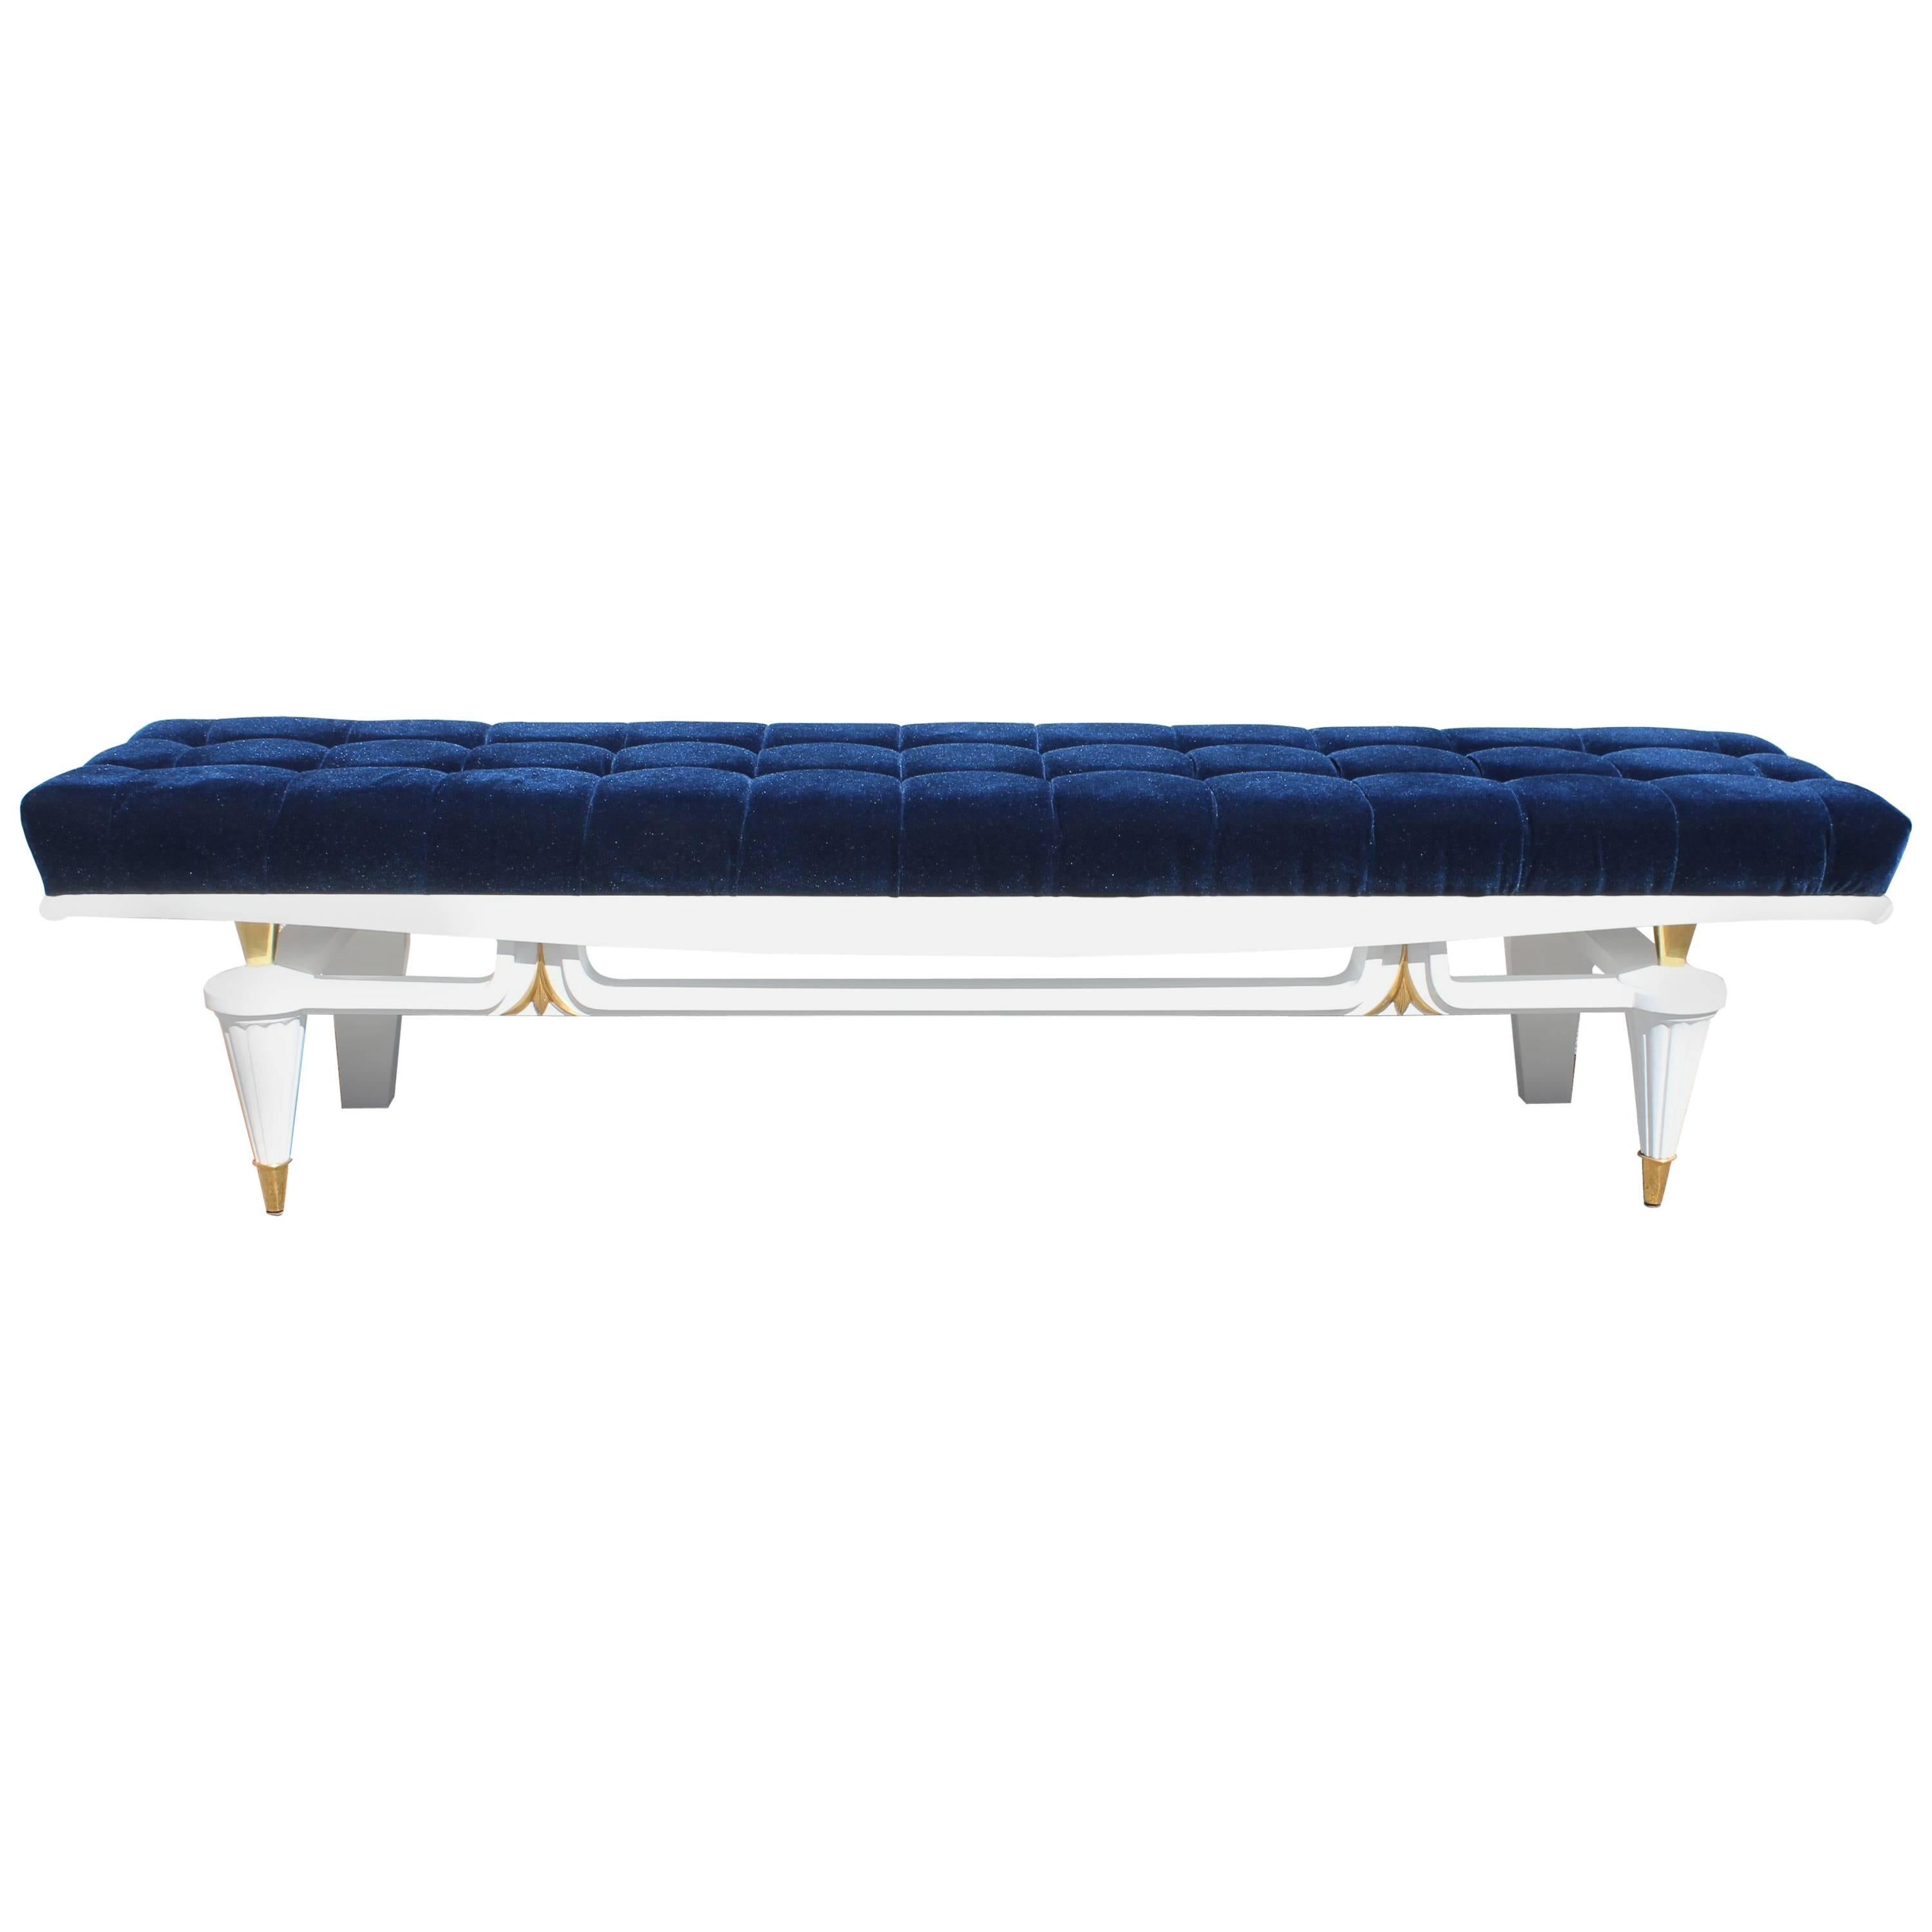 Long French Art Deco Snow White Lacquered Long Sitting Bench, circa 1940s